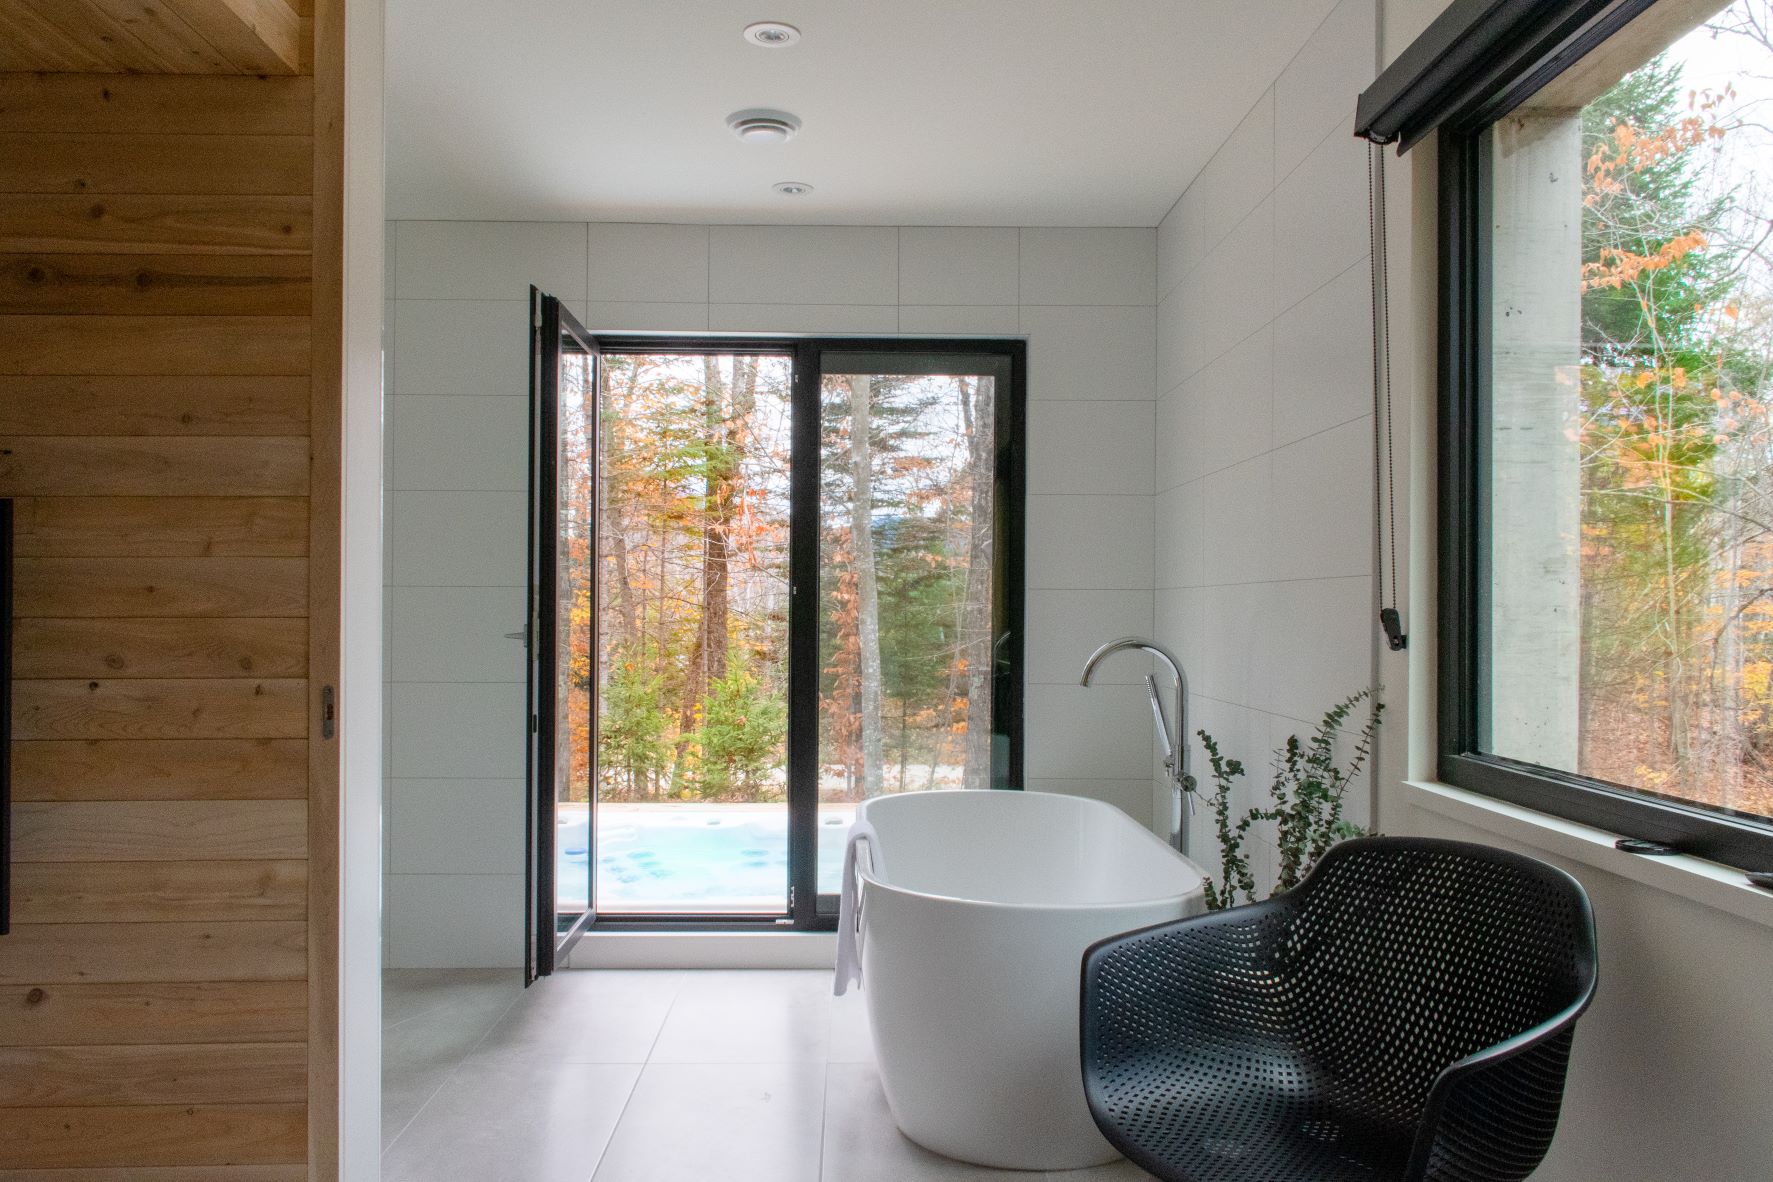 Cabin Spahaus, near Mont Tremblant Quebec, is a 2-bedroom Airbnb vacation rental featuring a spa experience of hot tub, sauna and open shower. This cottage rental includes access to an all-season luxury resort offering full amenities.